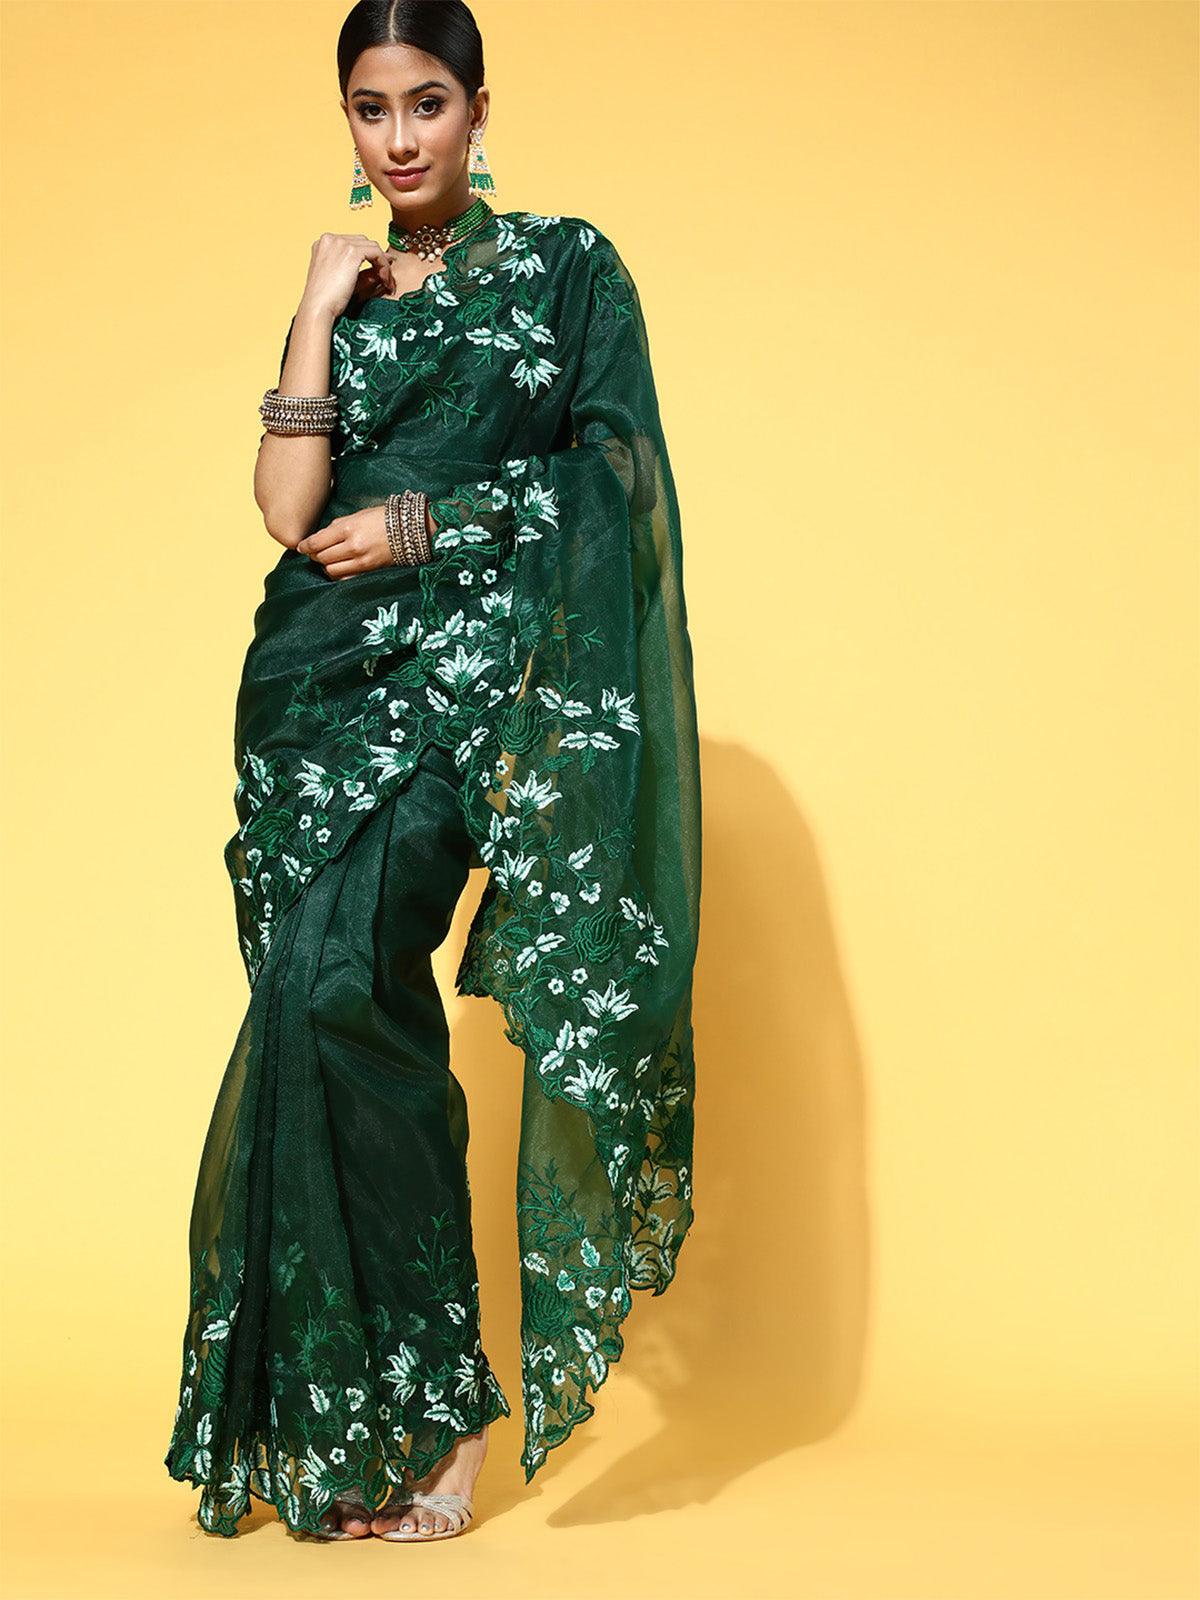 Women's Organza Green Embroidered Celebrity Saree With Blouse Piece - Odette